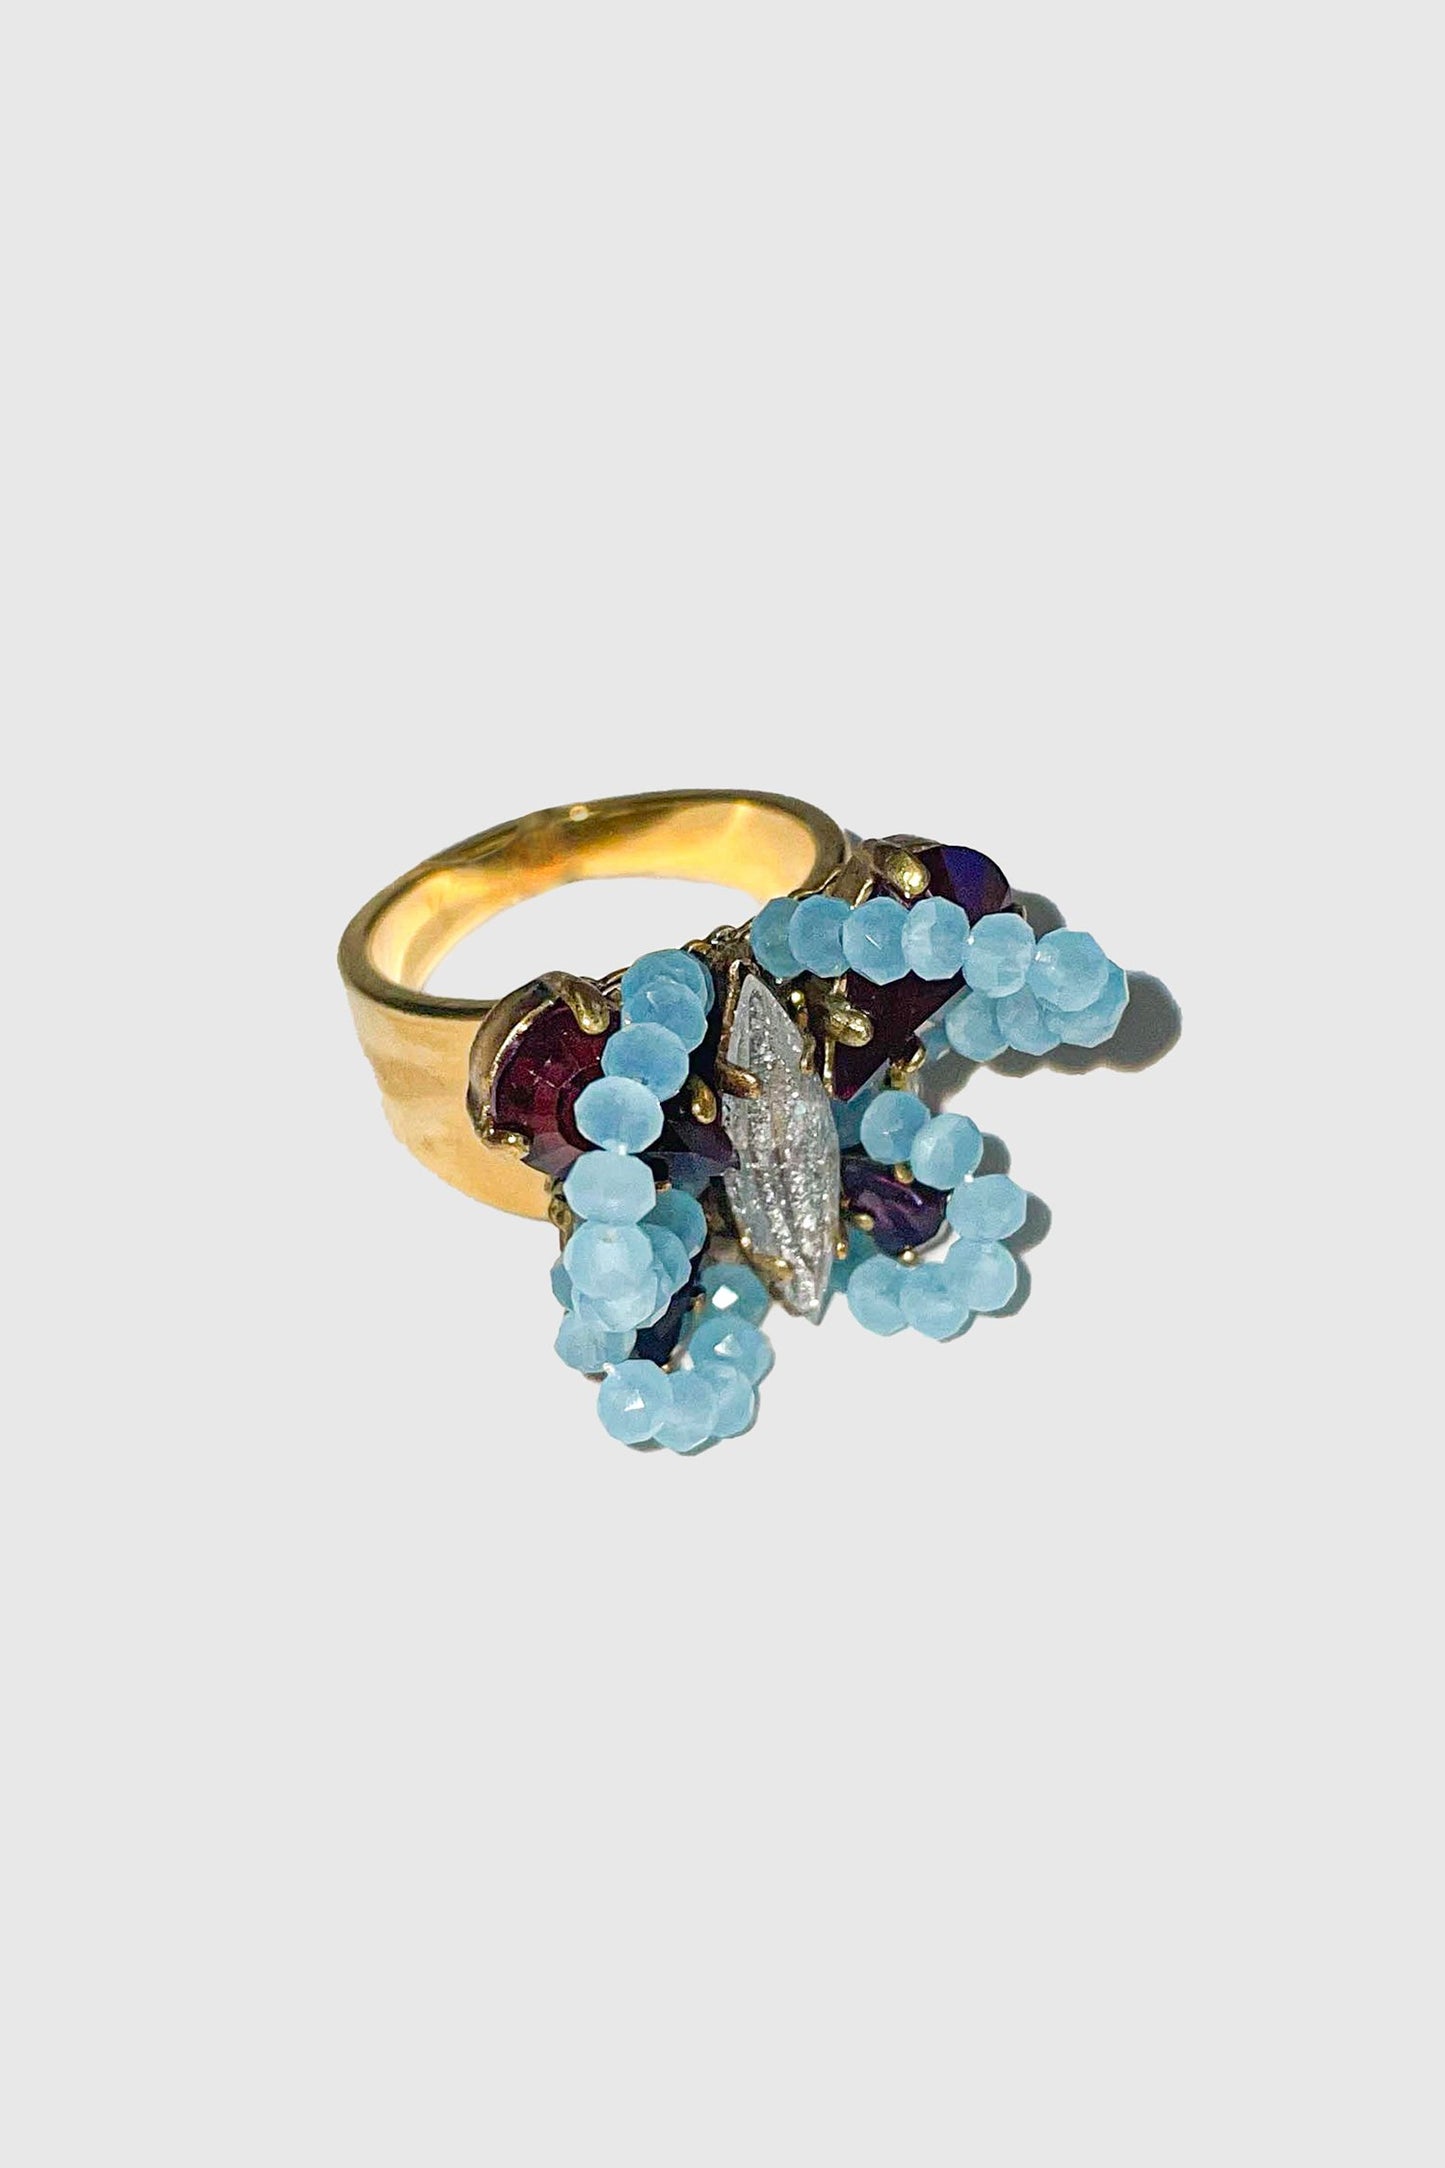 Butterfly ring with baby blue beads, body with an oval gemstone, dark red wing